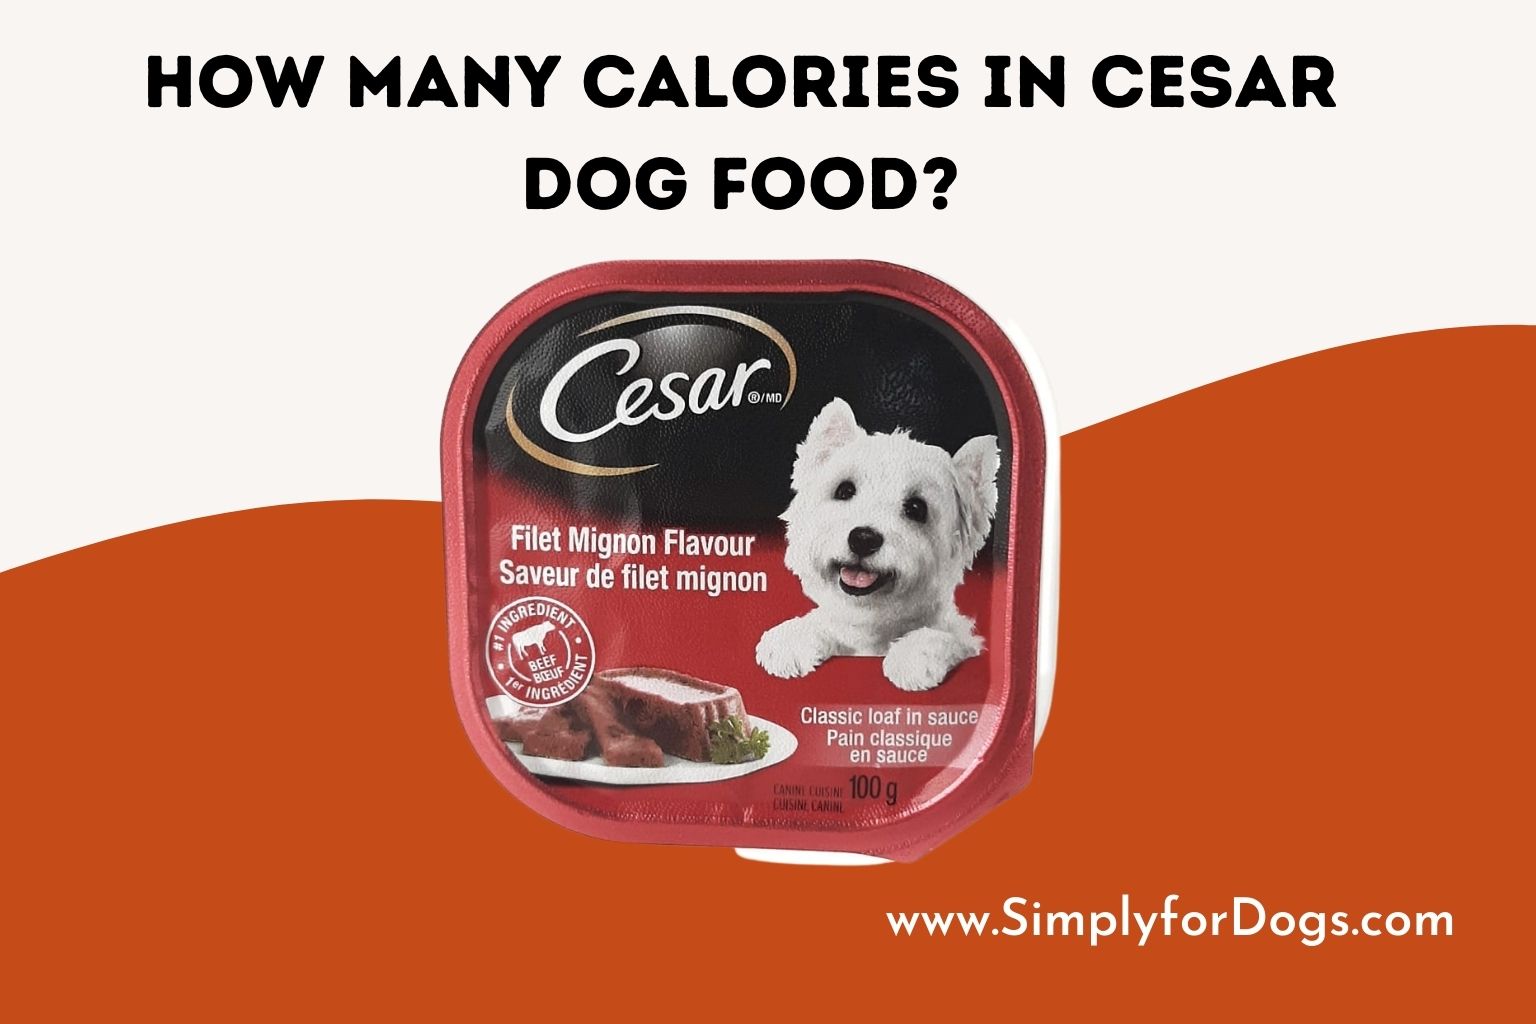 How Many Calories in Cesar Dog Food